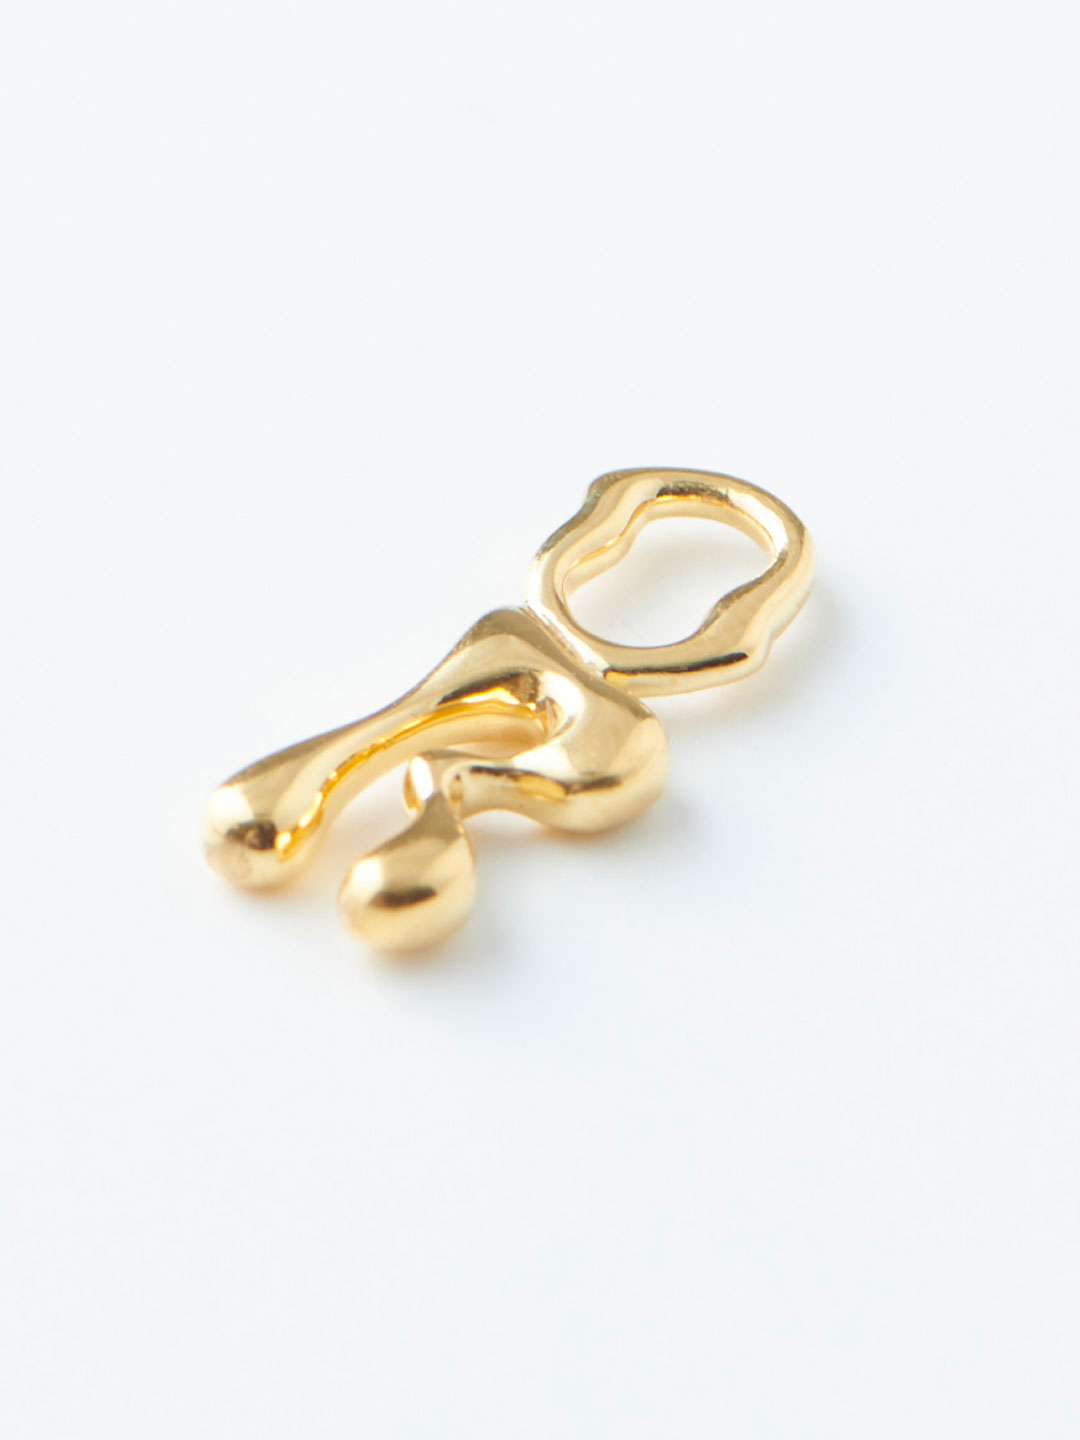 Fluent Letter R Charm - Yellow Gold